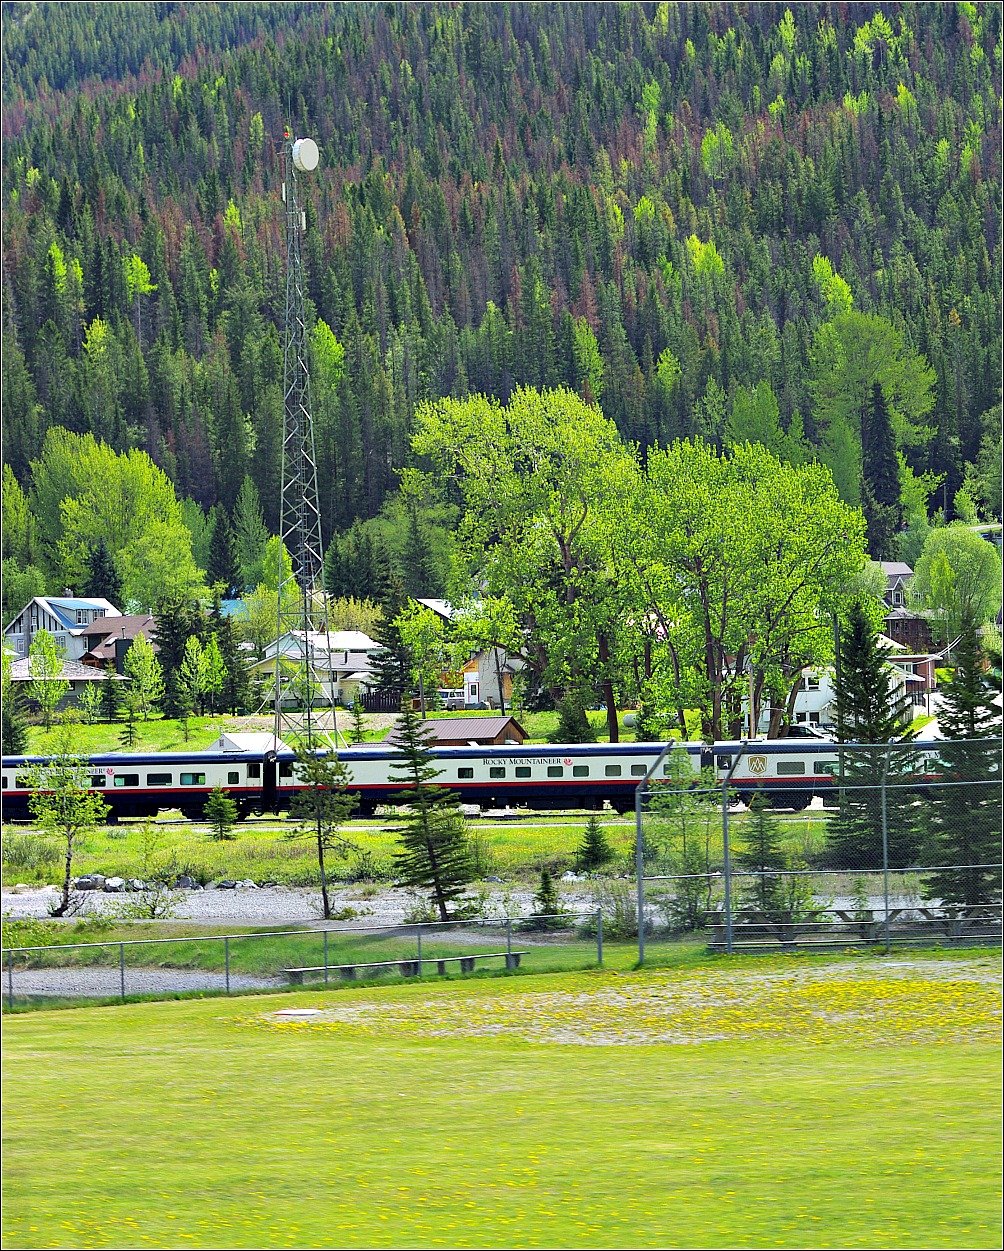 Train at the Town of Field near Emerald Lake Kicking Horse Pass